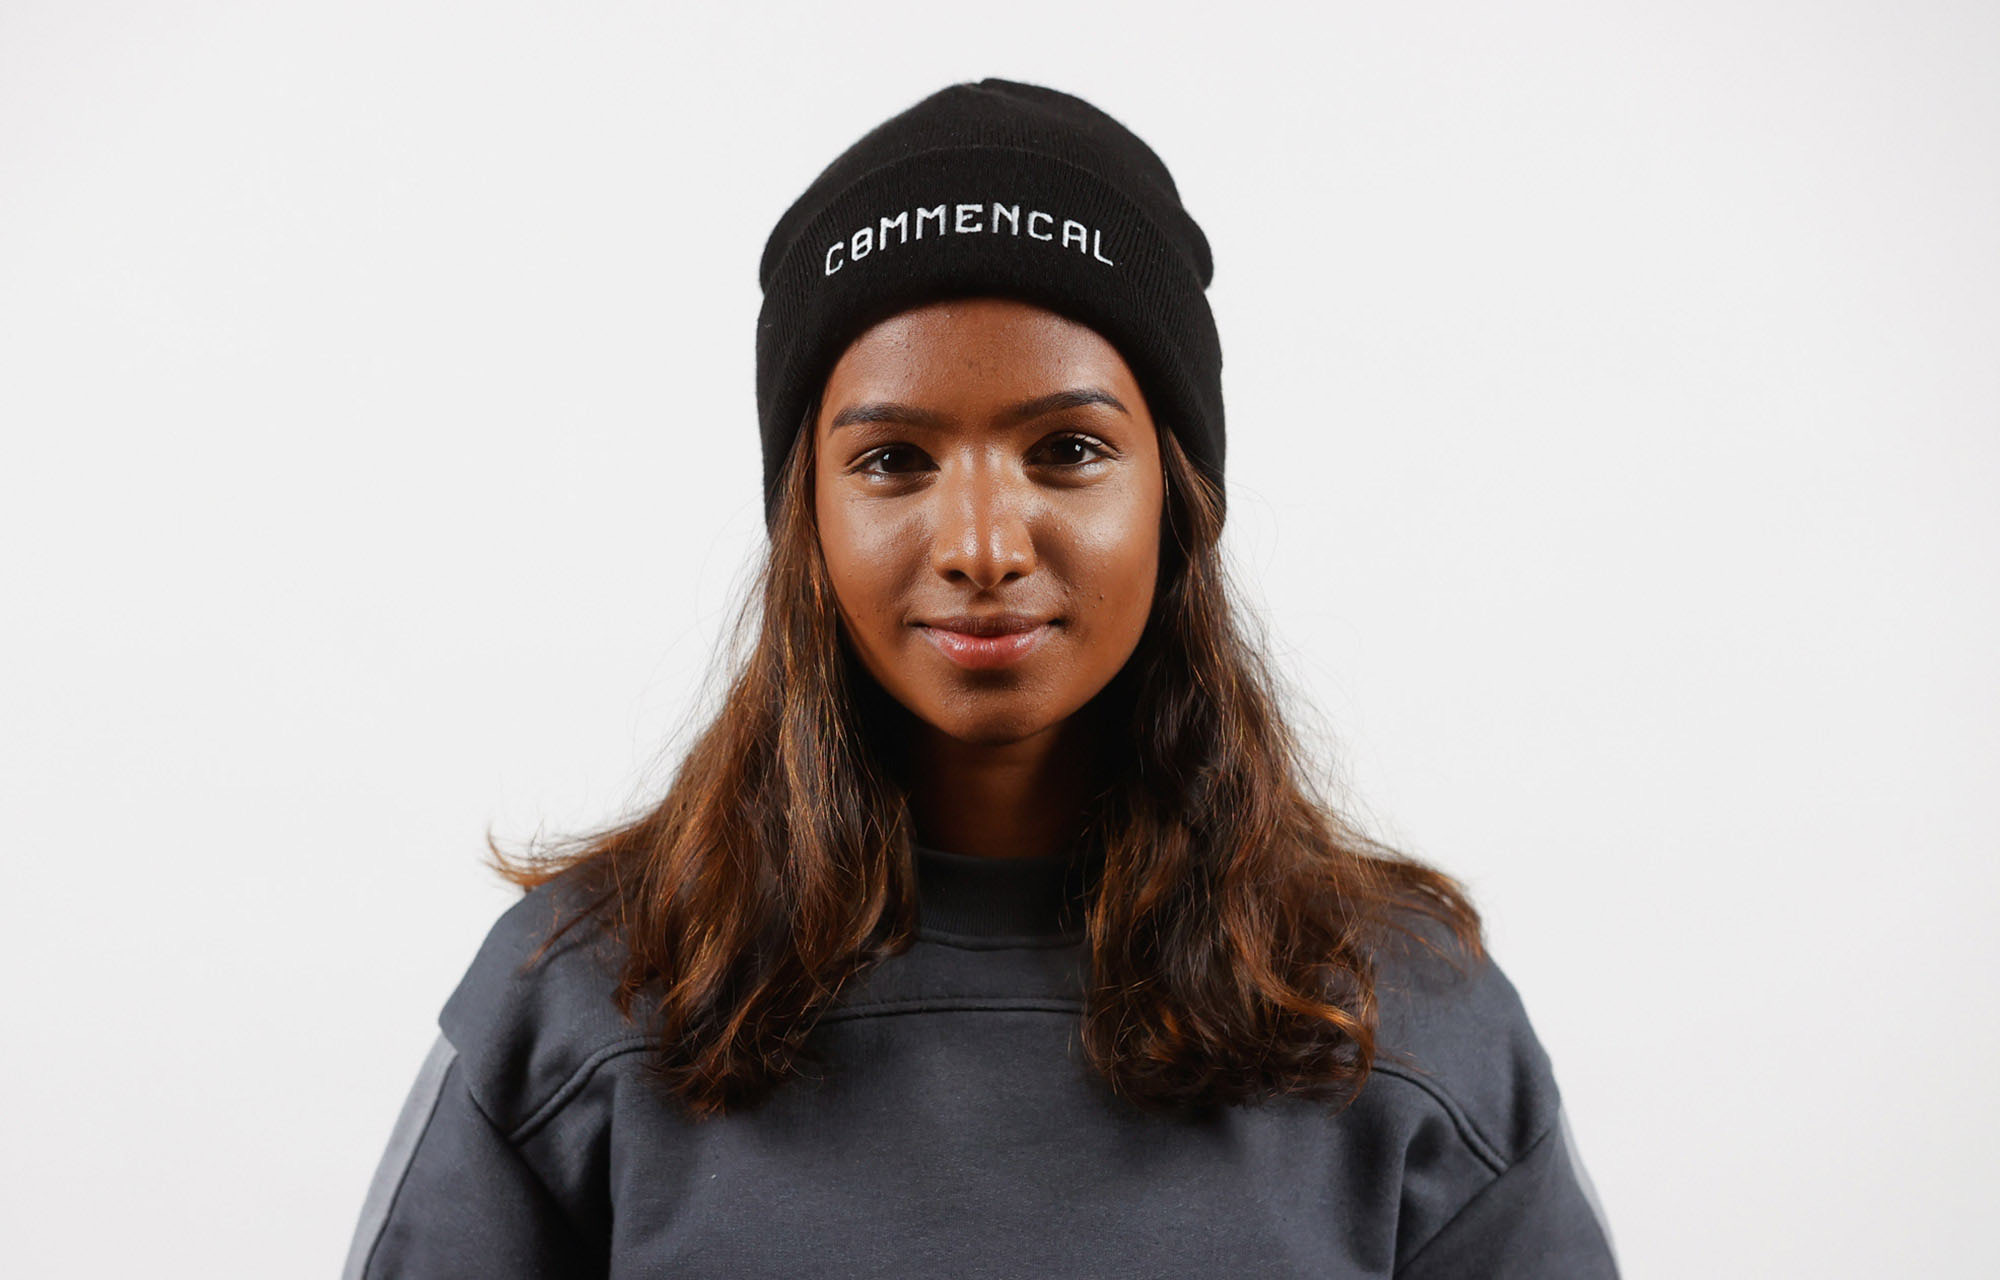 COMMENCAL CORPORATE BEANIE BLACK image number null